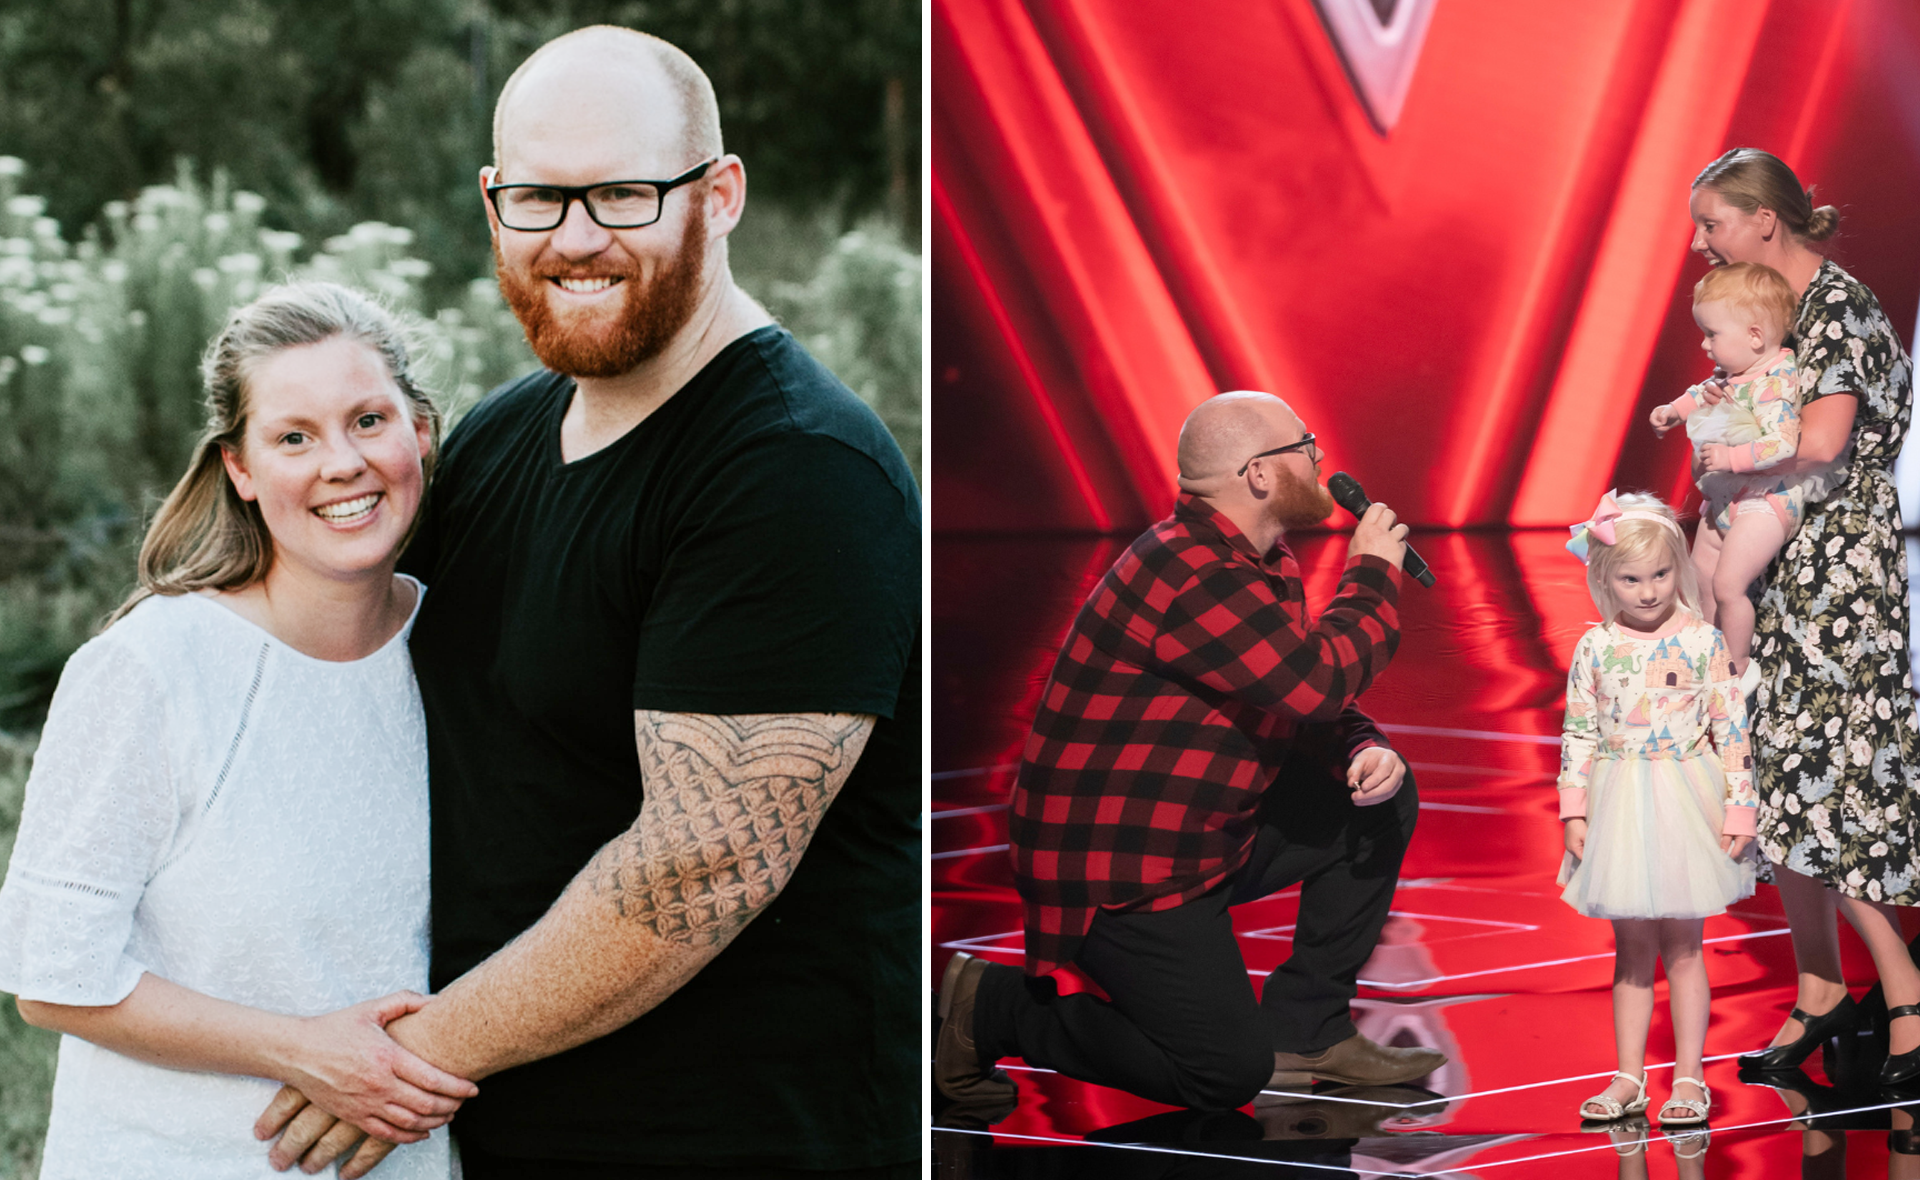 EXCLUSIVE: The Voice’s Mick Harrington says he won’t sing at his wedding after his on-stage proposal stole the show